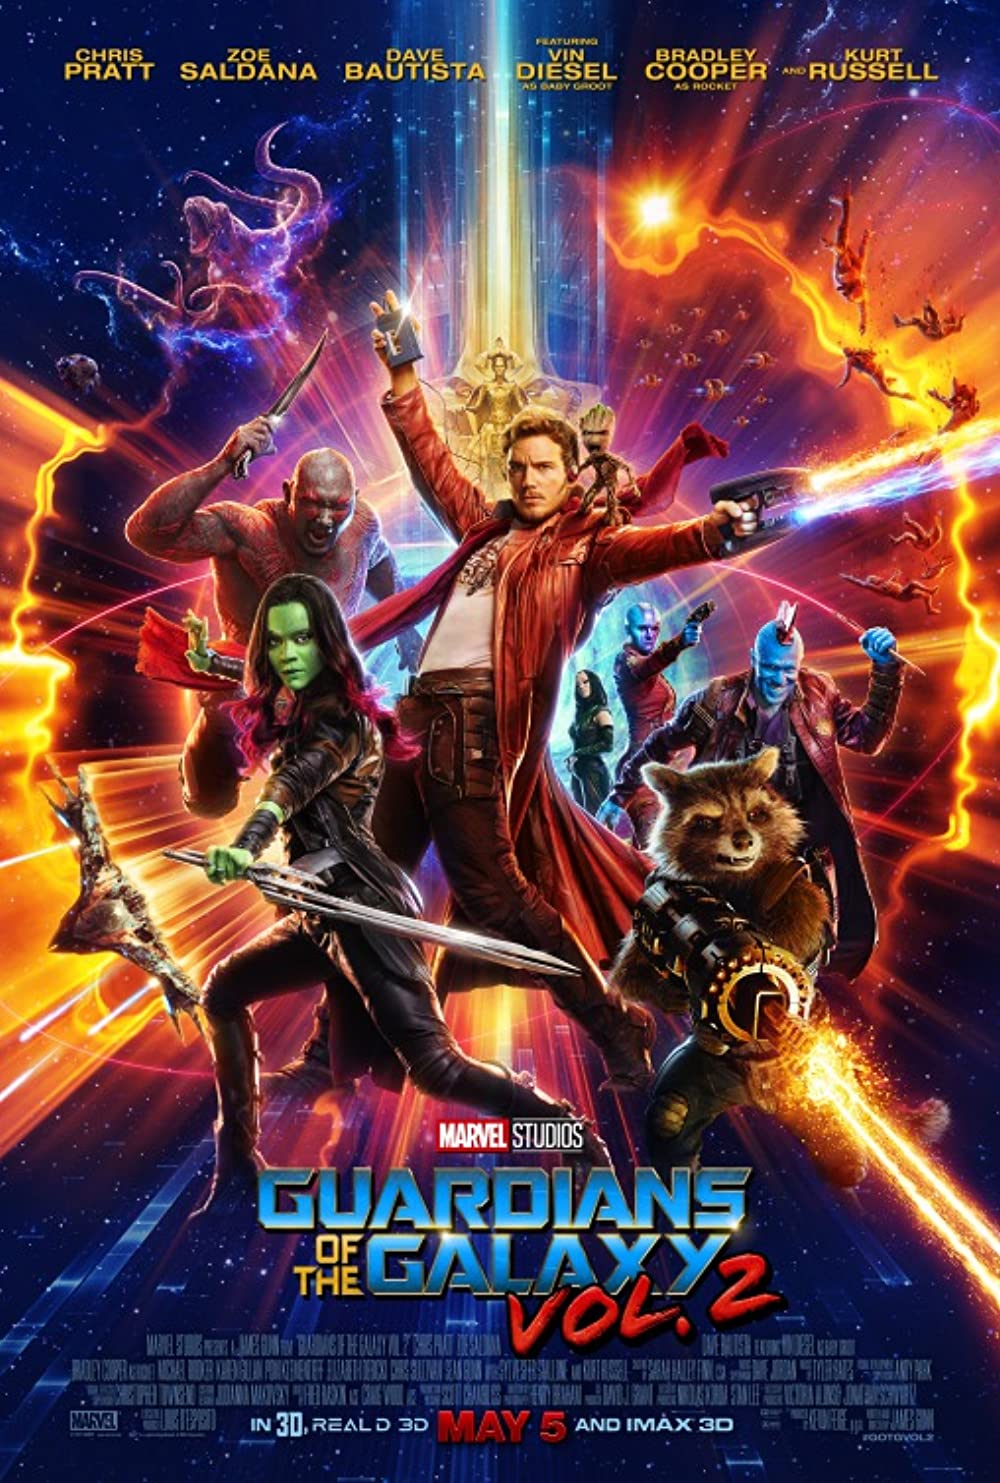 Guardians Of The Galaxy Vol 2 2017 13957 Poster.jpg